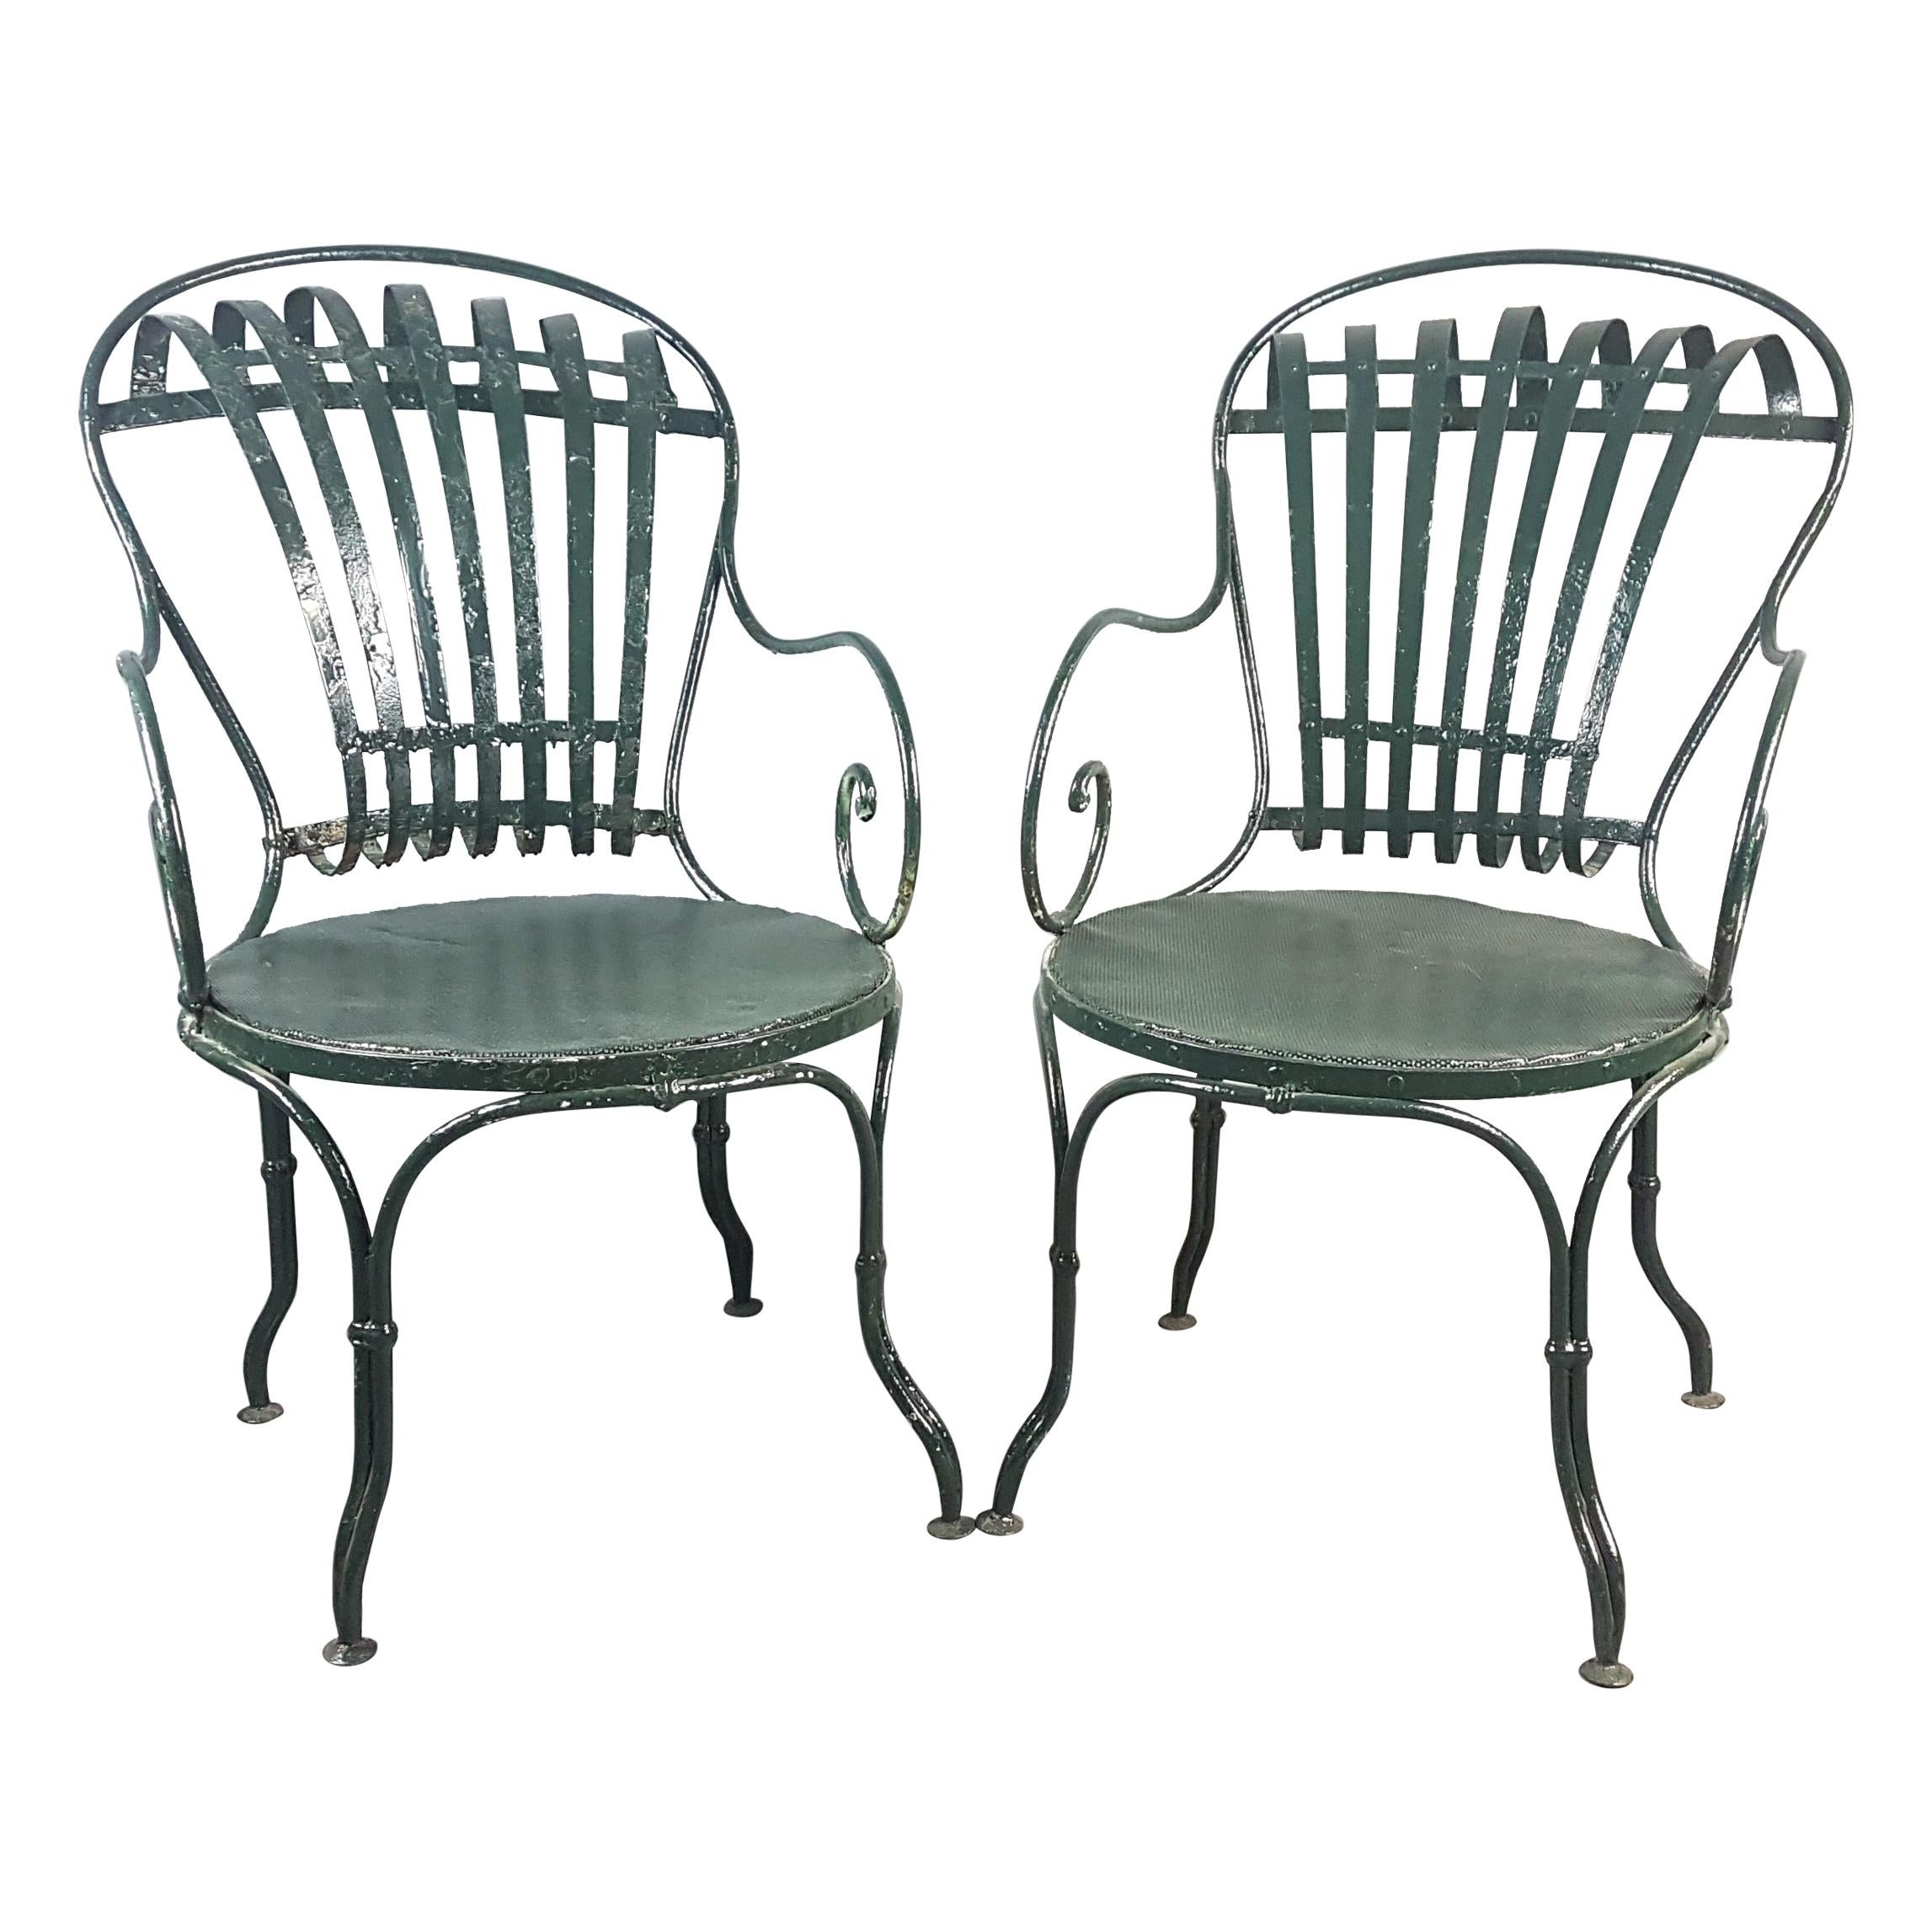 Pair of Green Francois Carre Chairs Designed by Le Corbusier For Sale